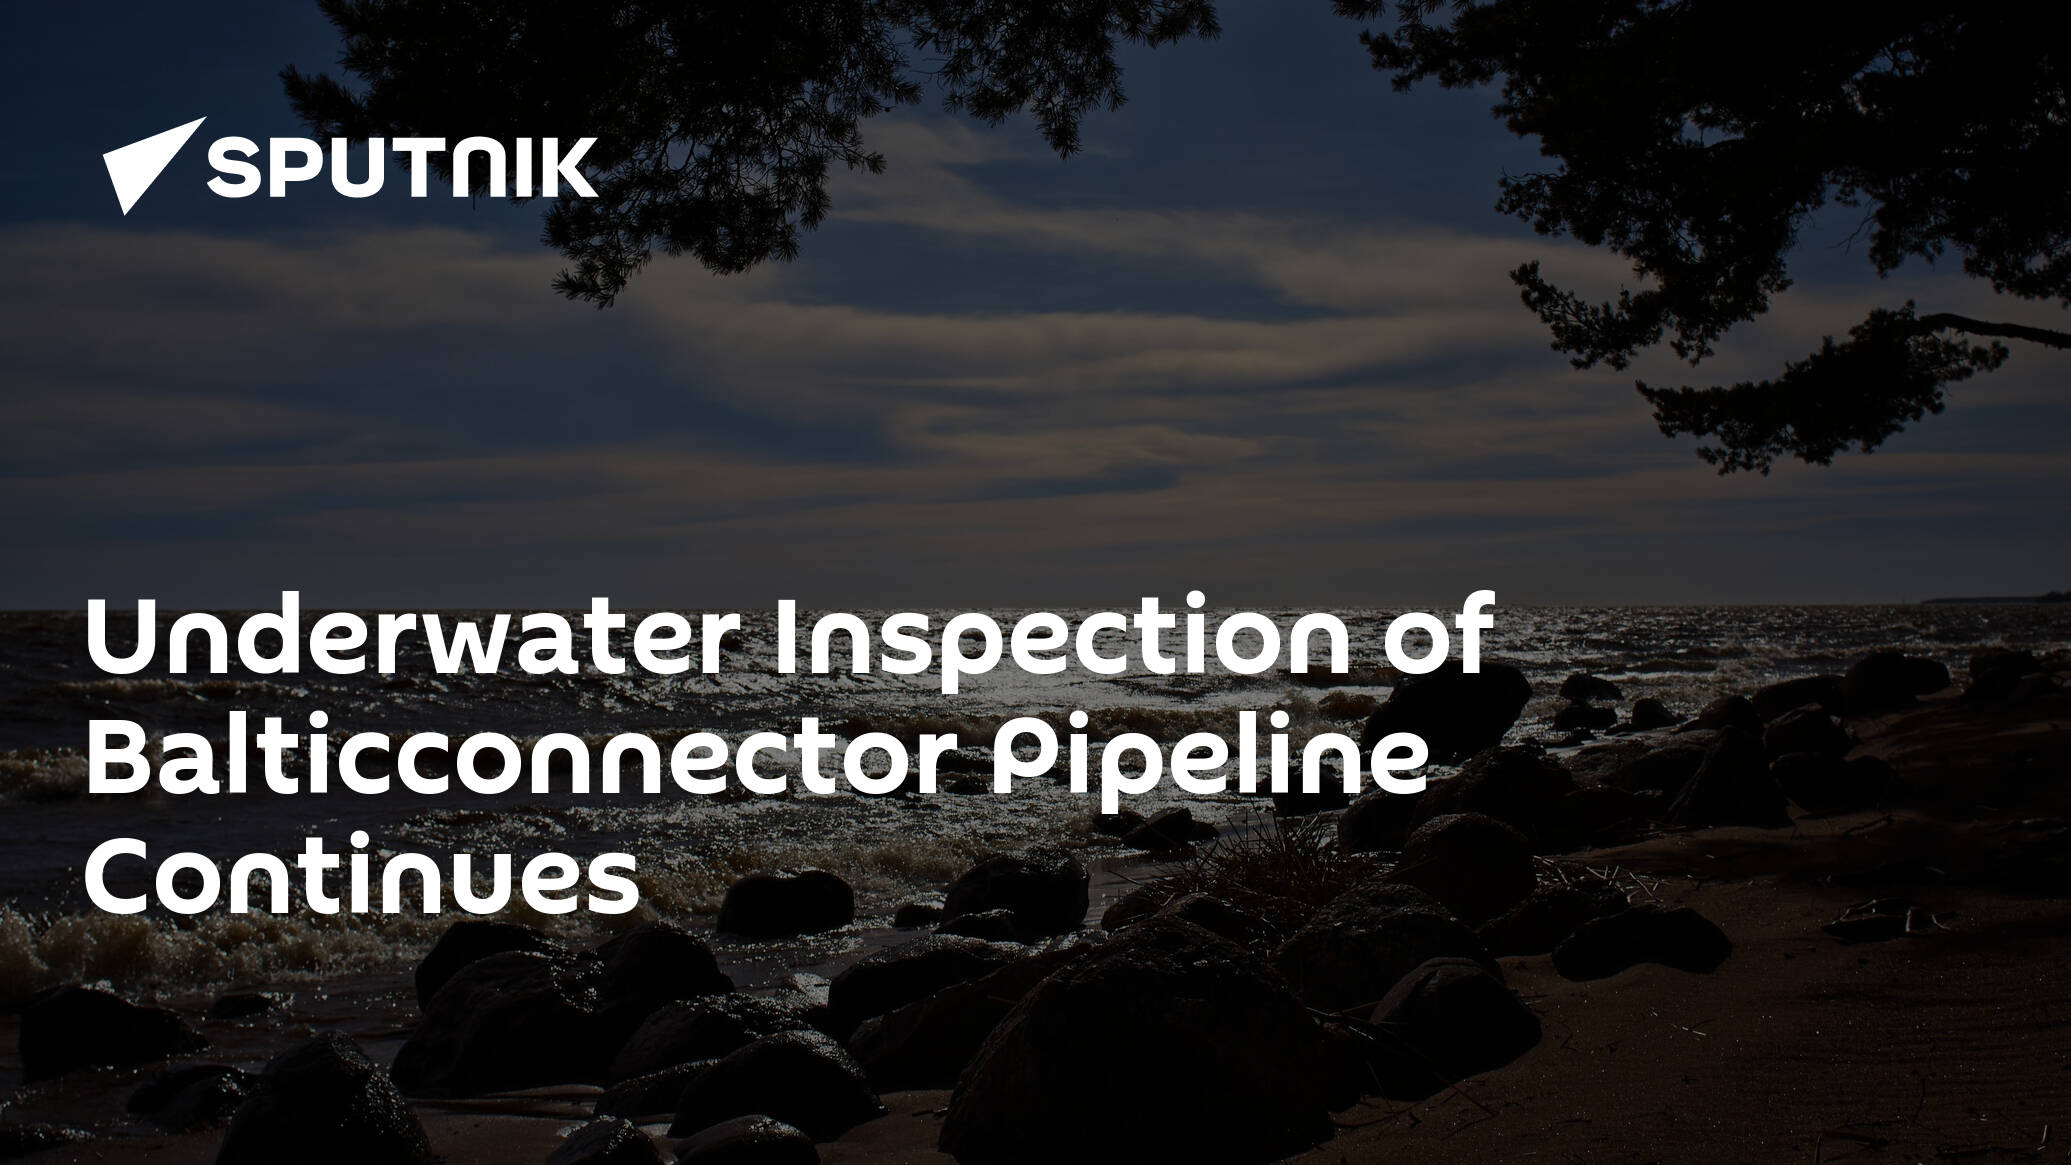 Underwater Inspection of Balticconnector Pipeline Continues